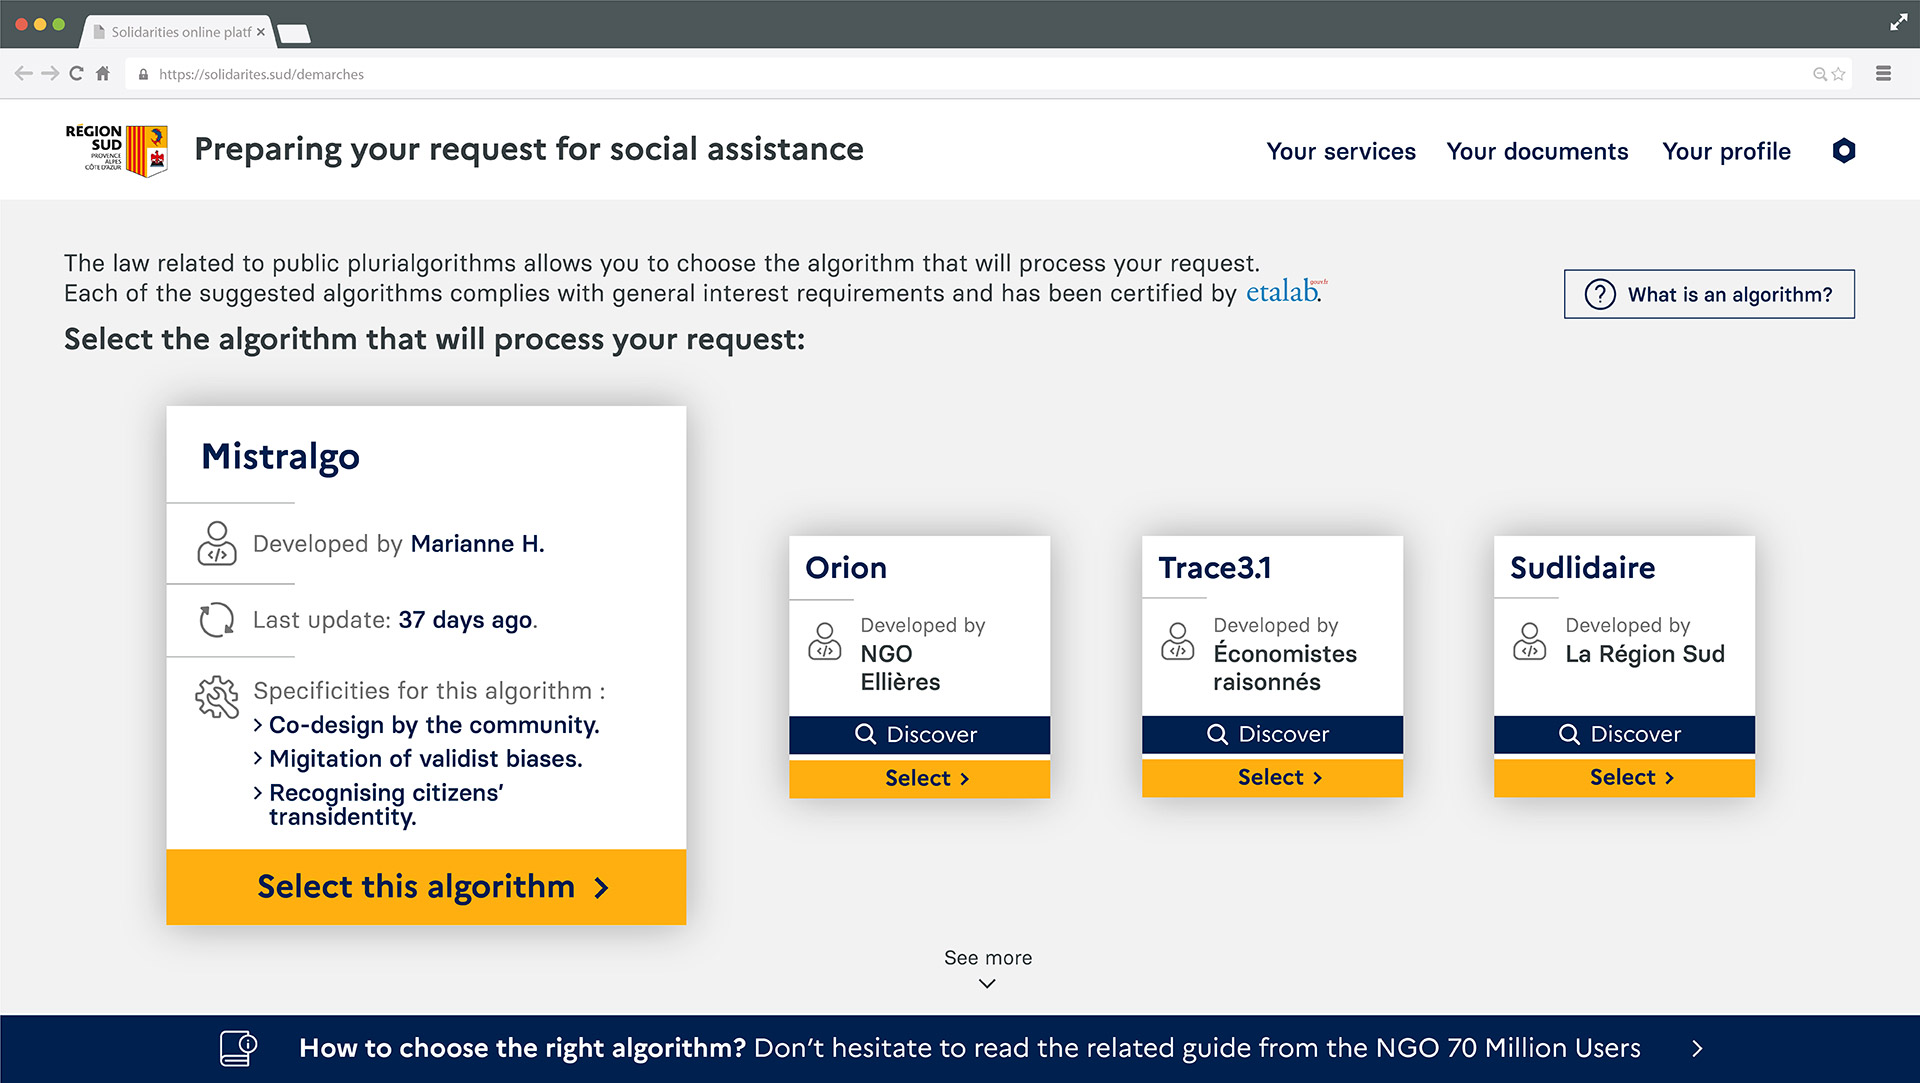 The selection screen for the algorithm that will process a request for social aid